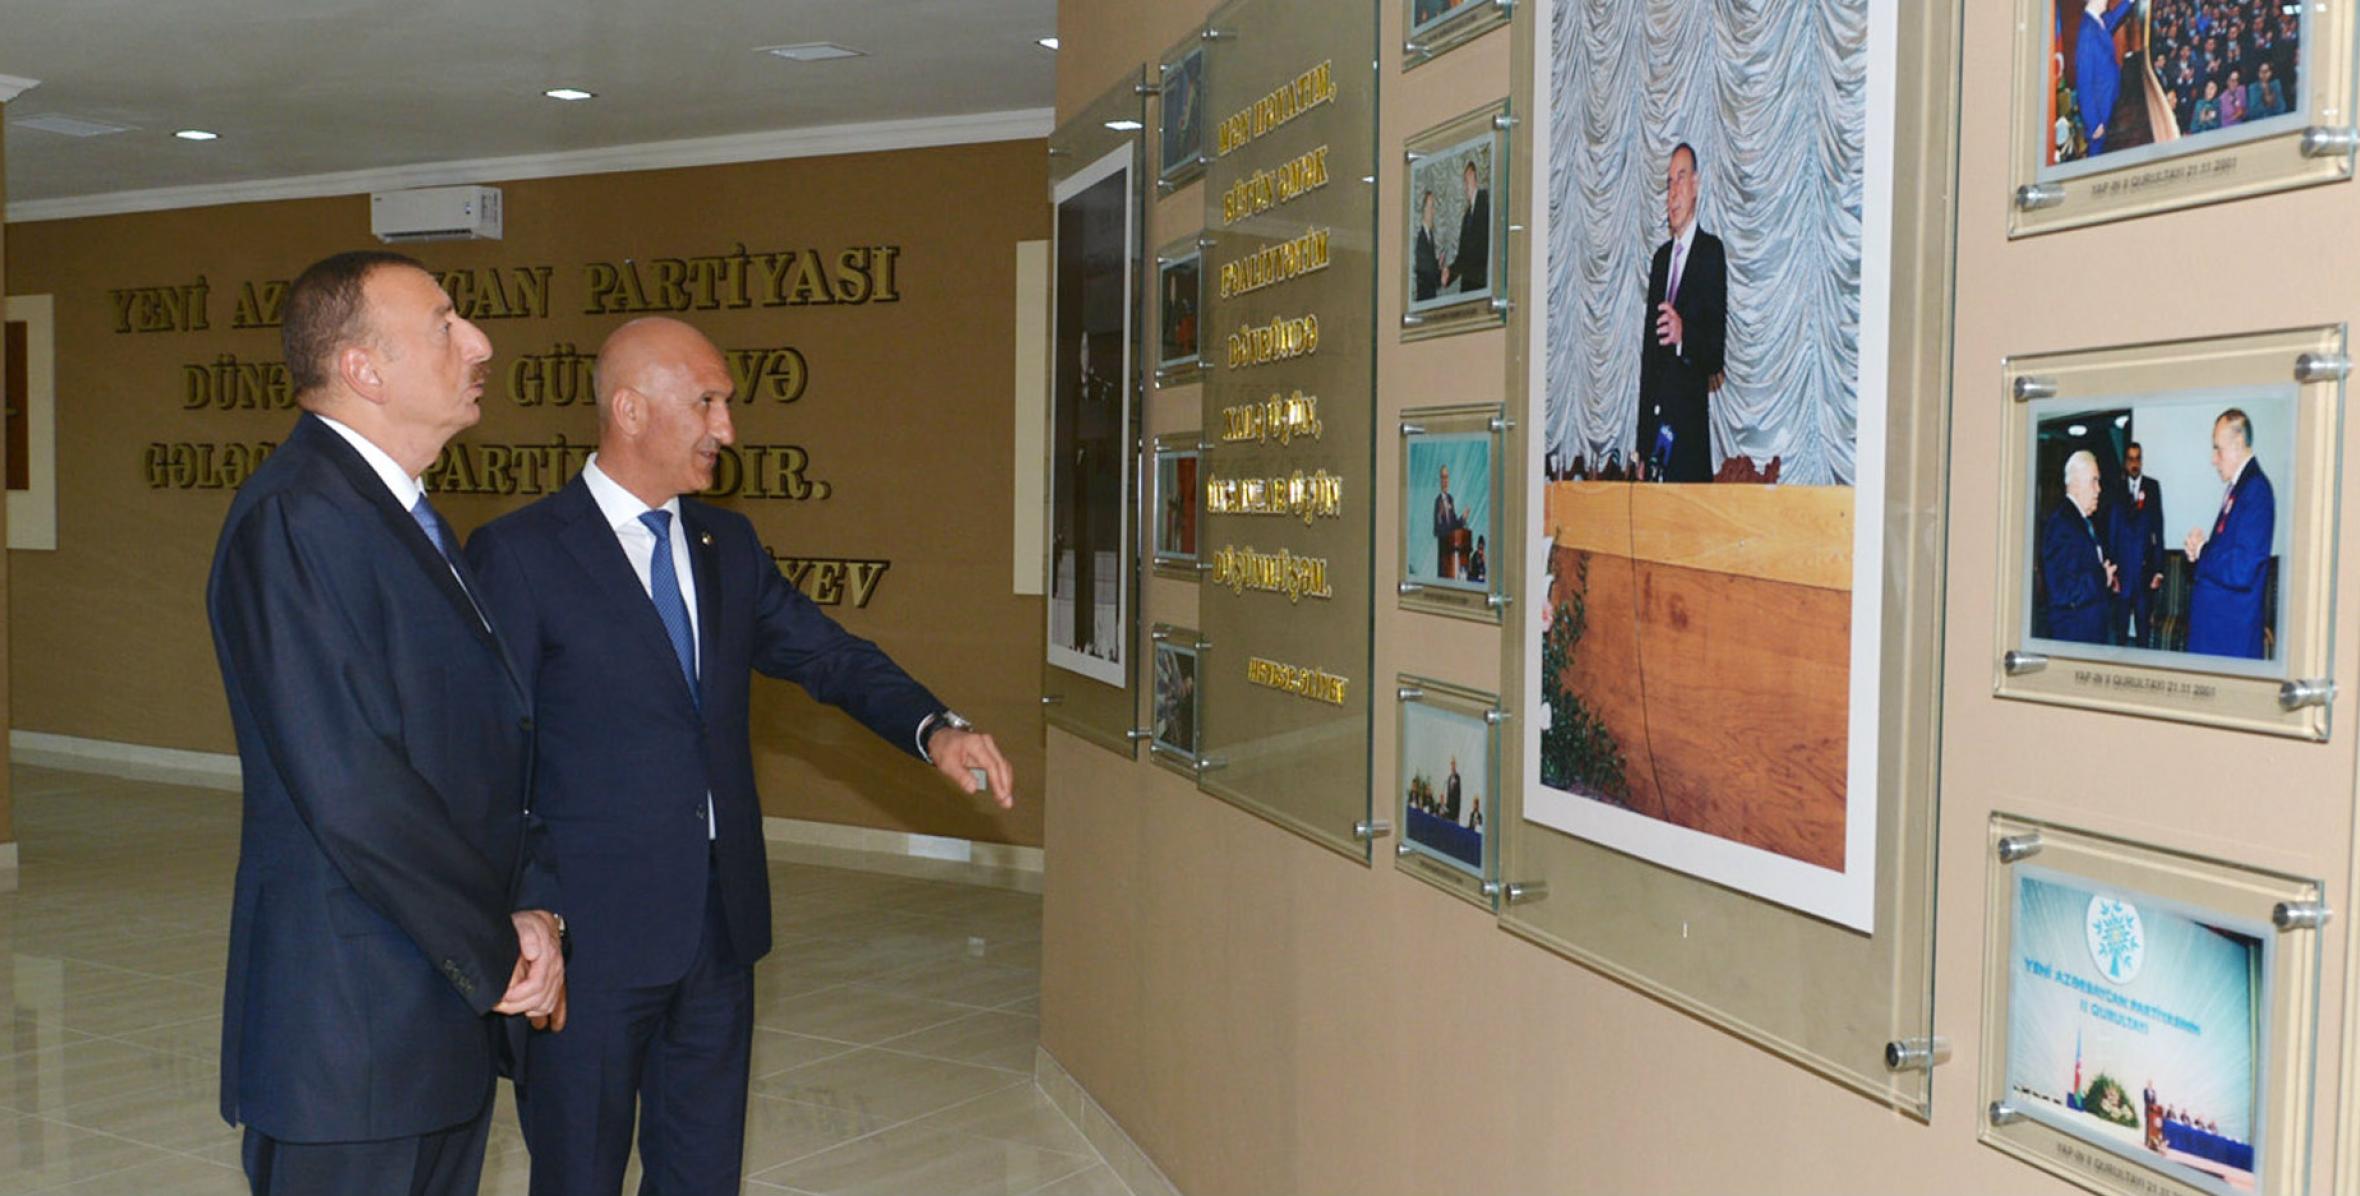 Ilham Aliyev attended the opening of a new office building of the Siyazan district branch of the “Yeni Azerbaijan Party”